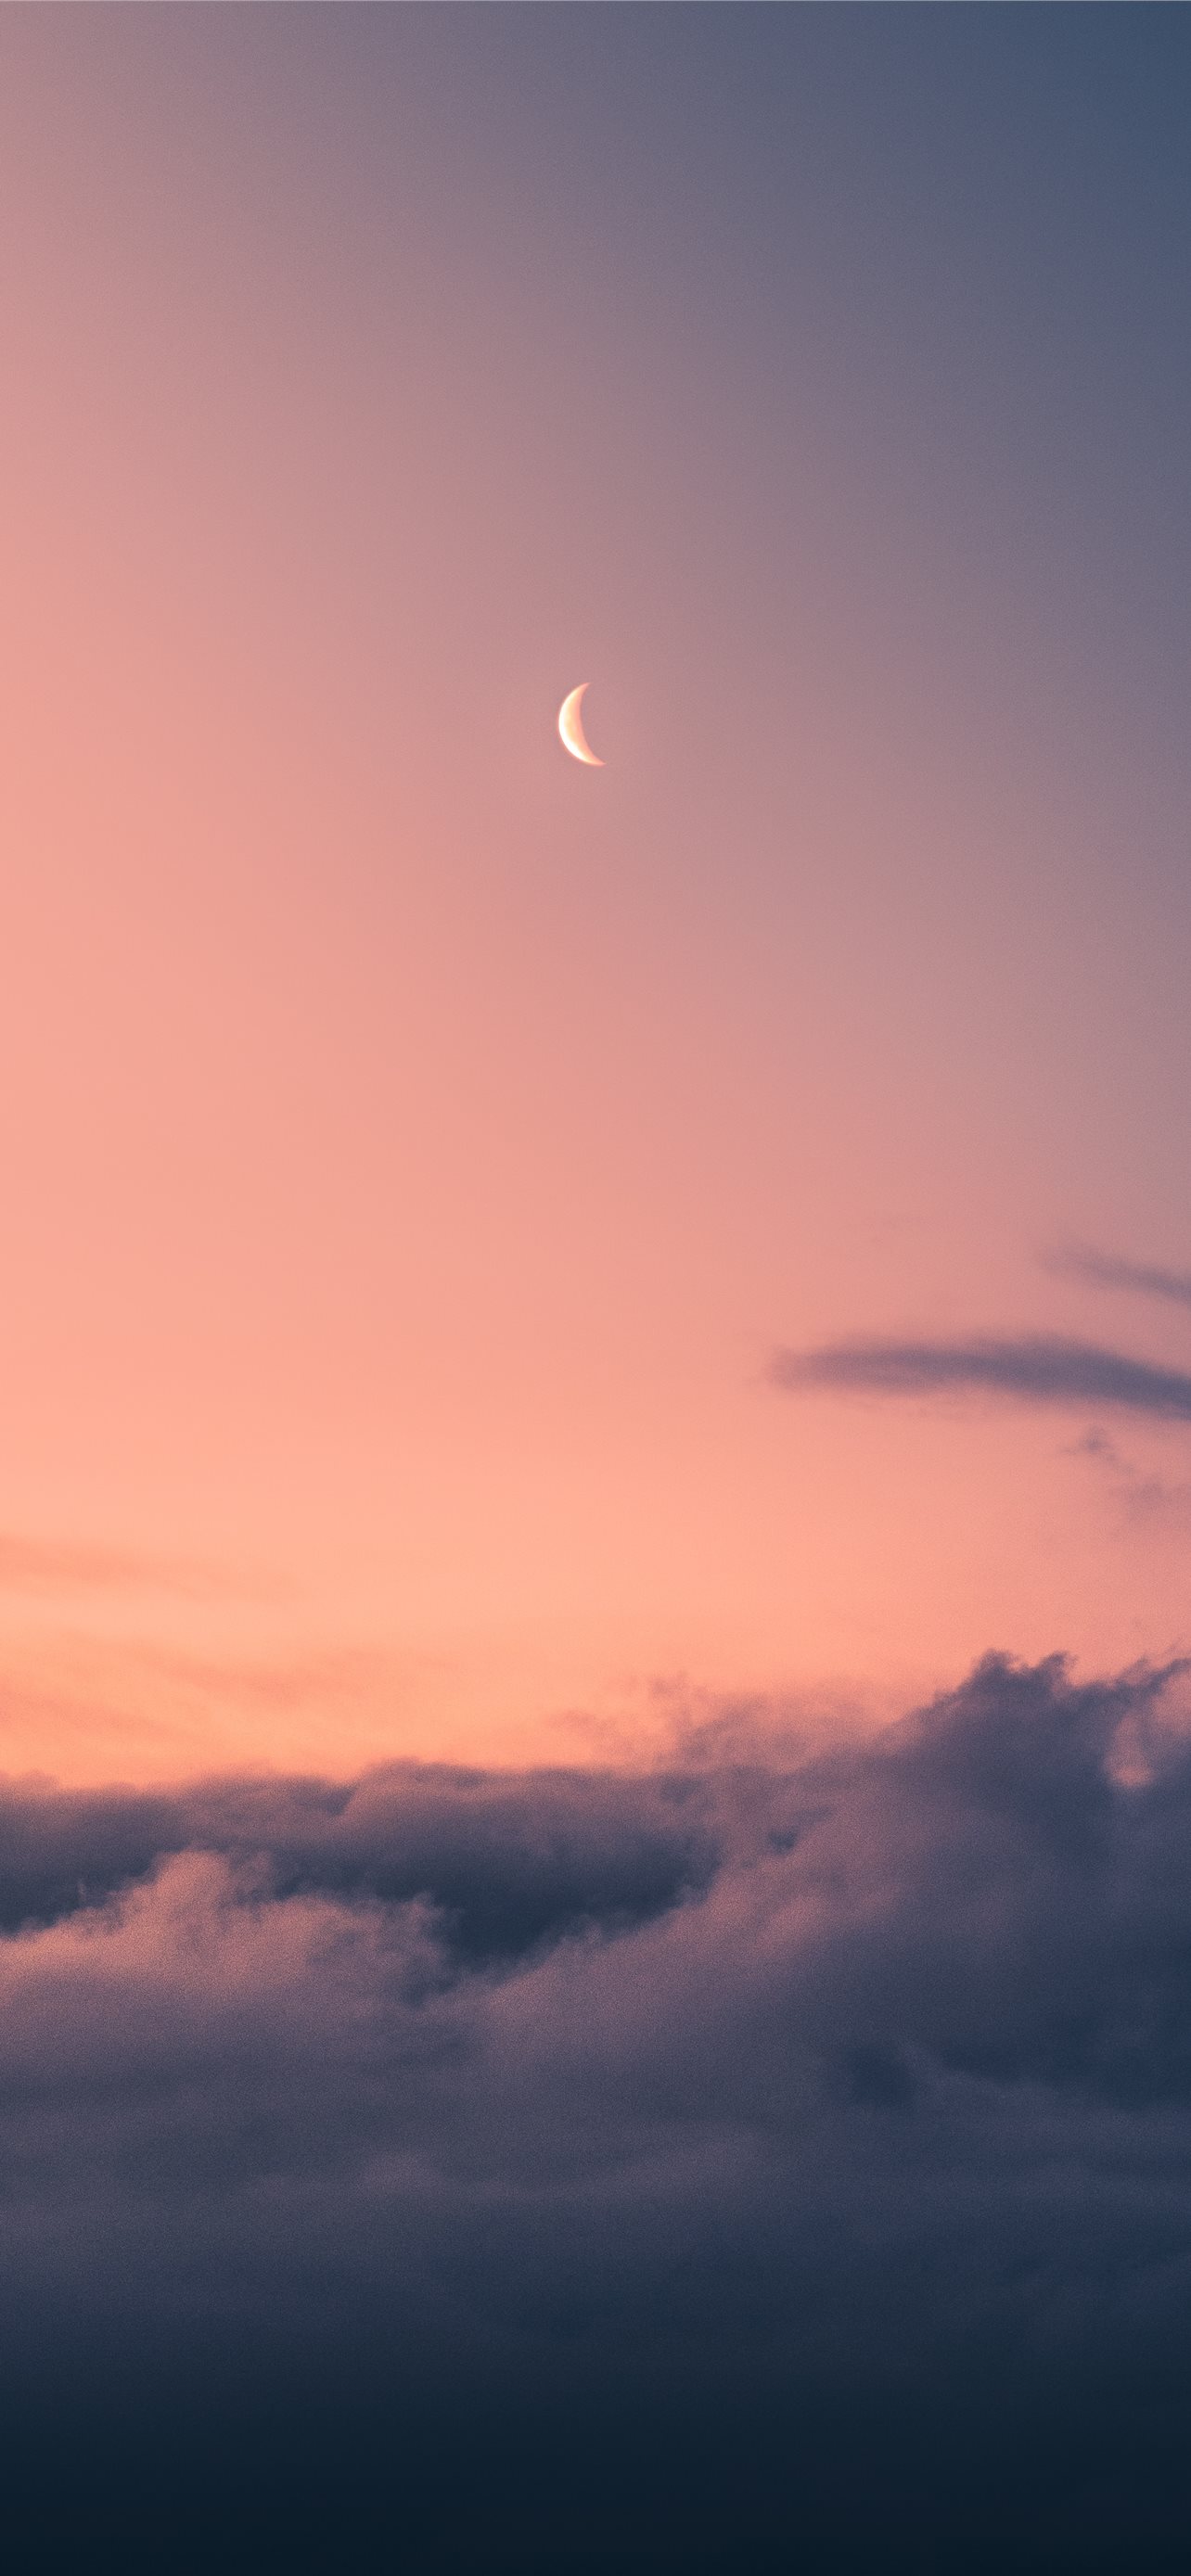 50+ Cloud Aesthetic Wallpaper Perfect For Your Phone! - The Pink Brunette